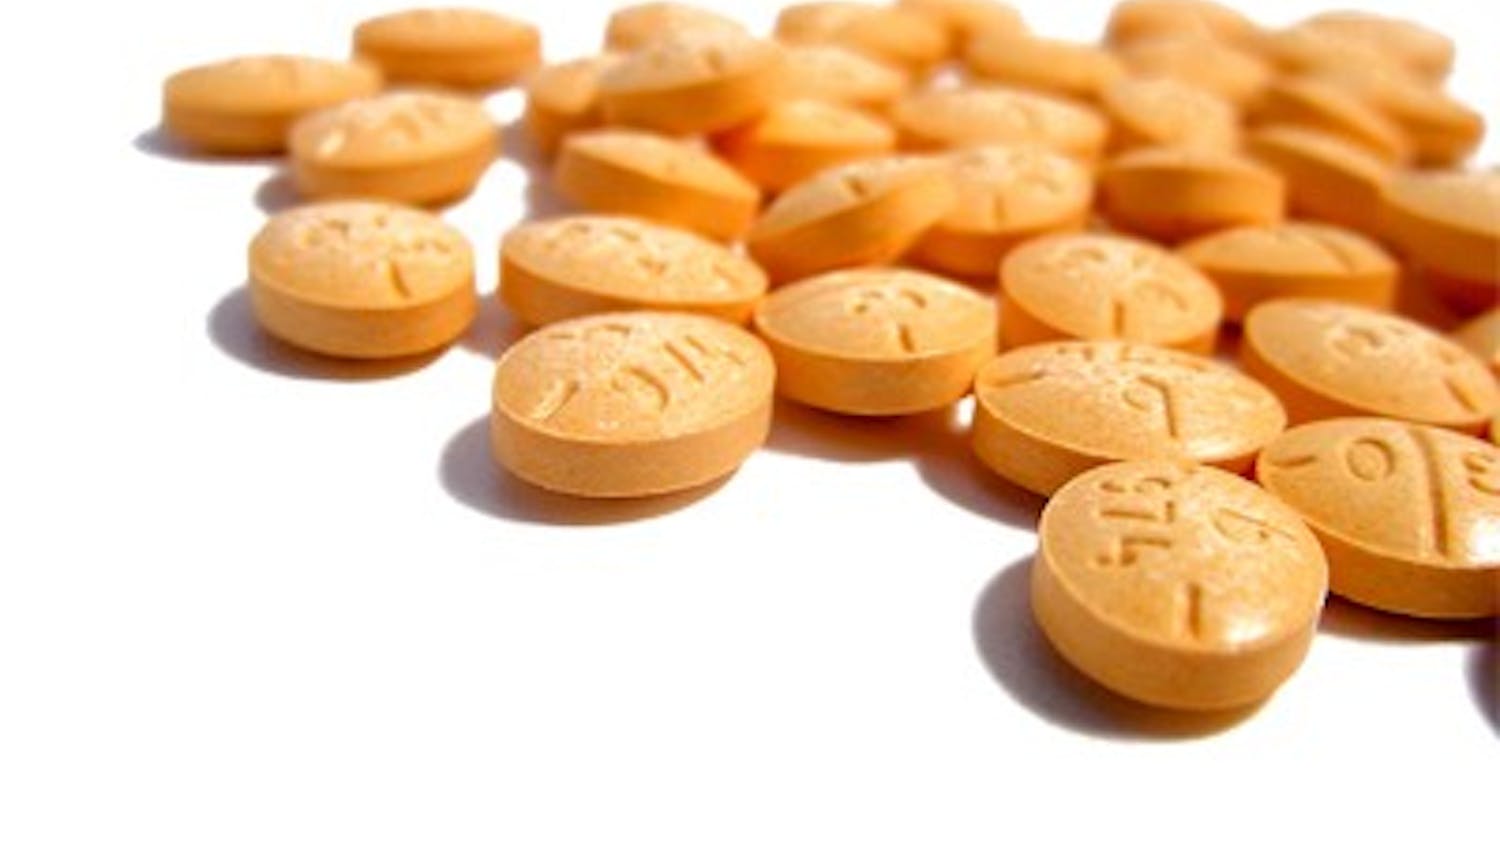 Adderall can have harmful side affects including loss of appetite and sleep.